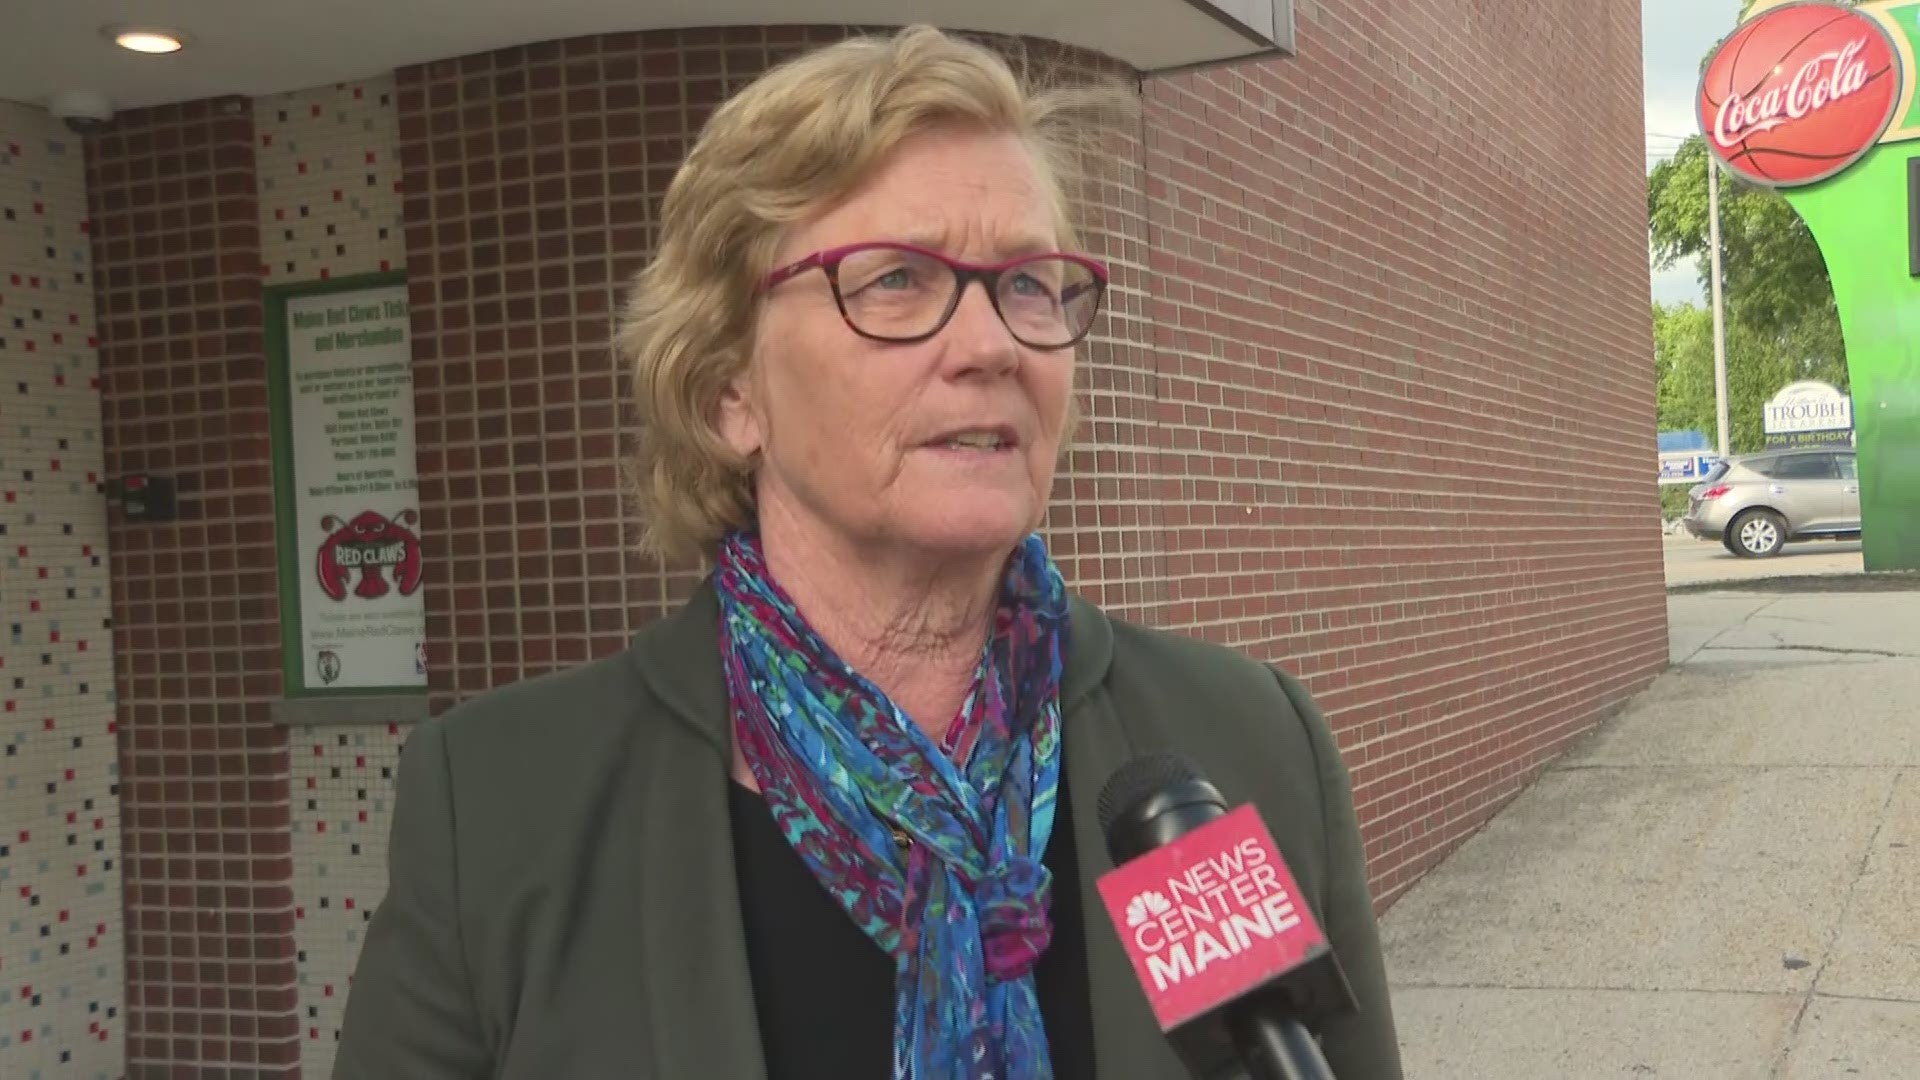 Rep. Chellie Pingree shared her take on the influx of asylum seekers to Portland.